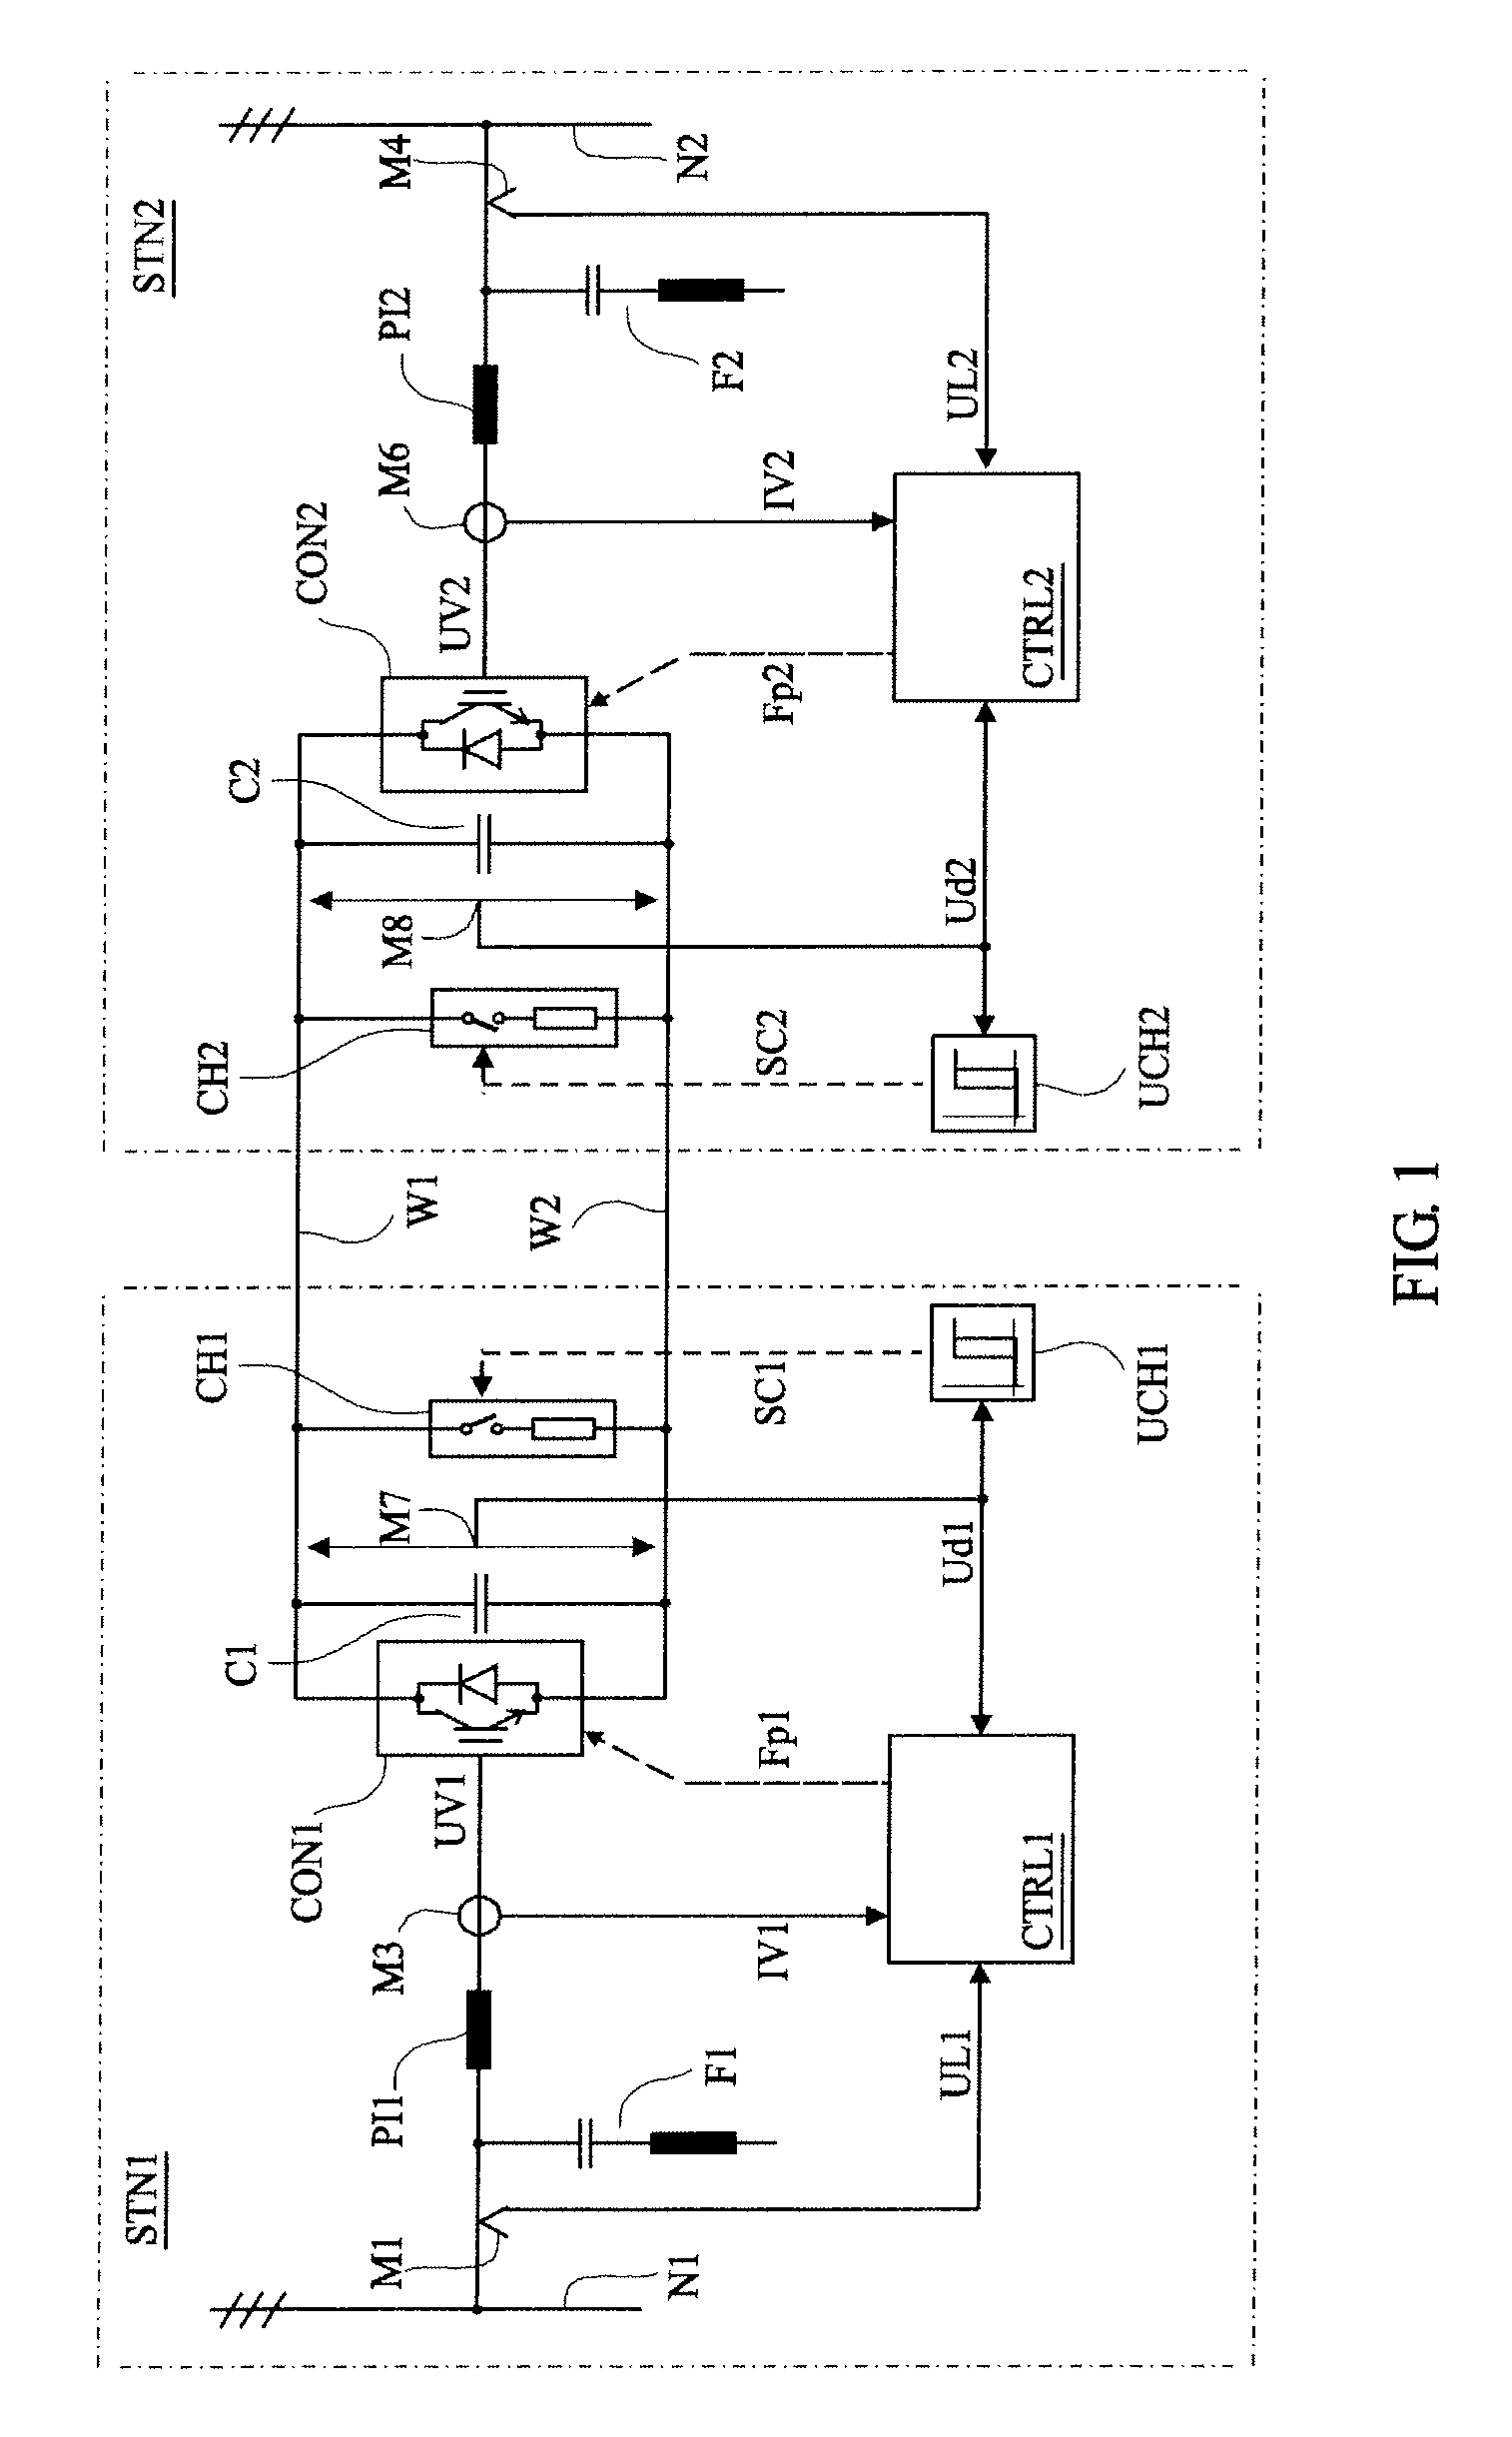 HVDC system and method to control a voltage source converter in a HVDC system